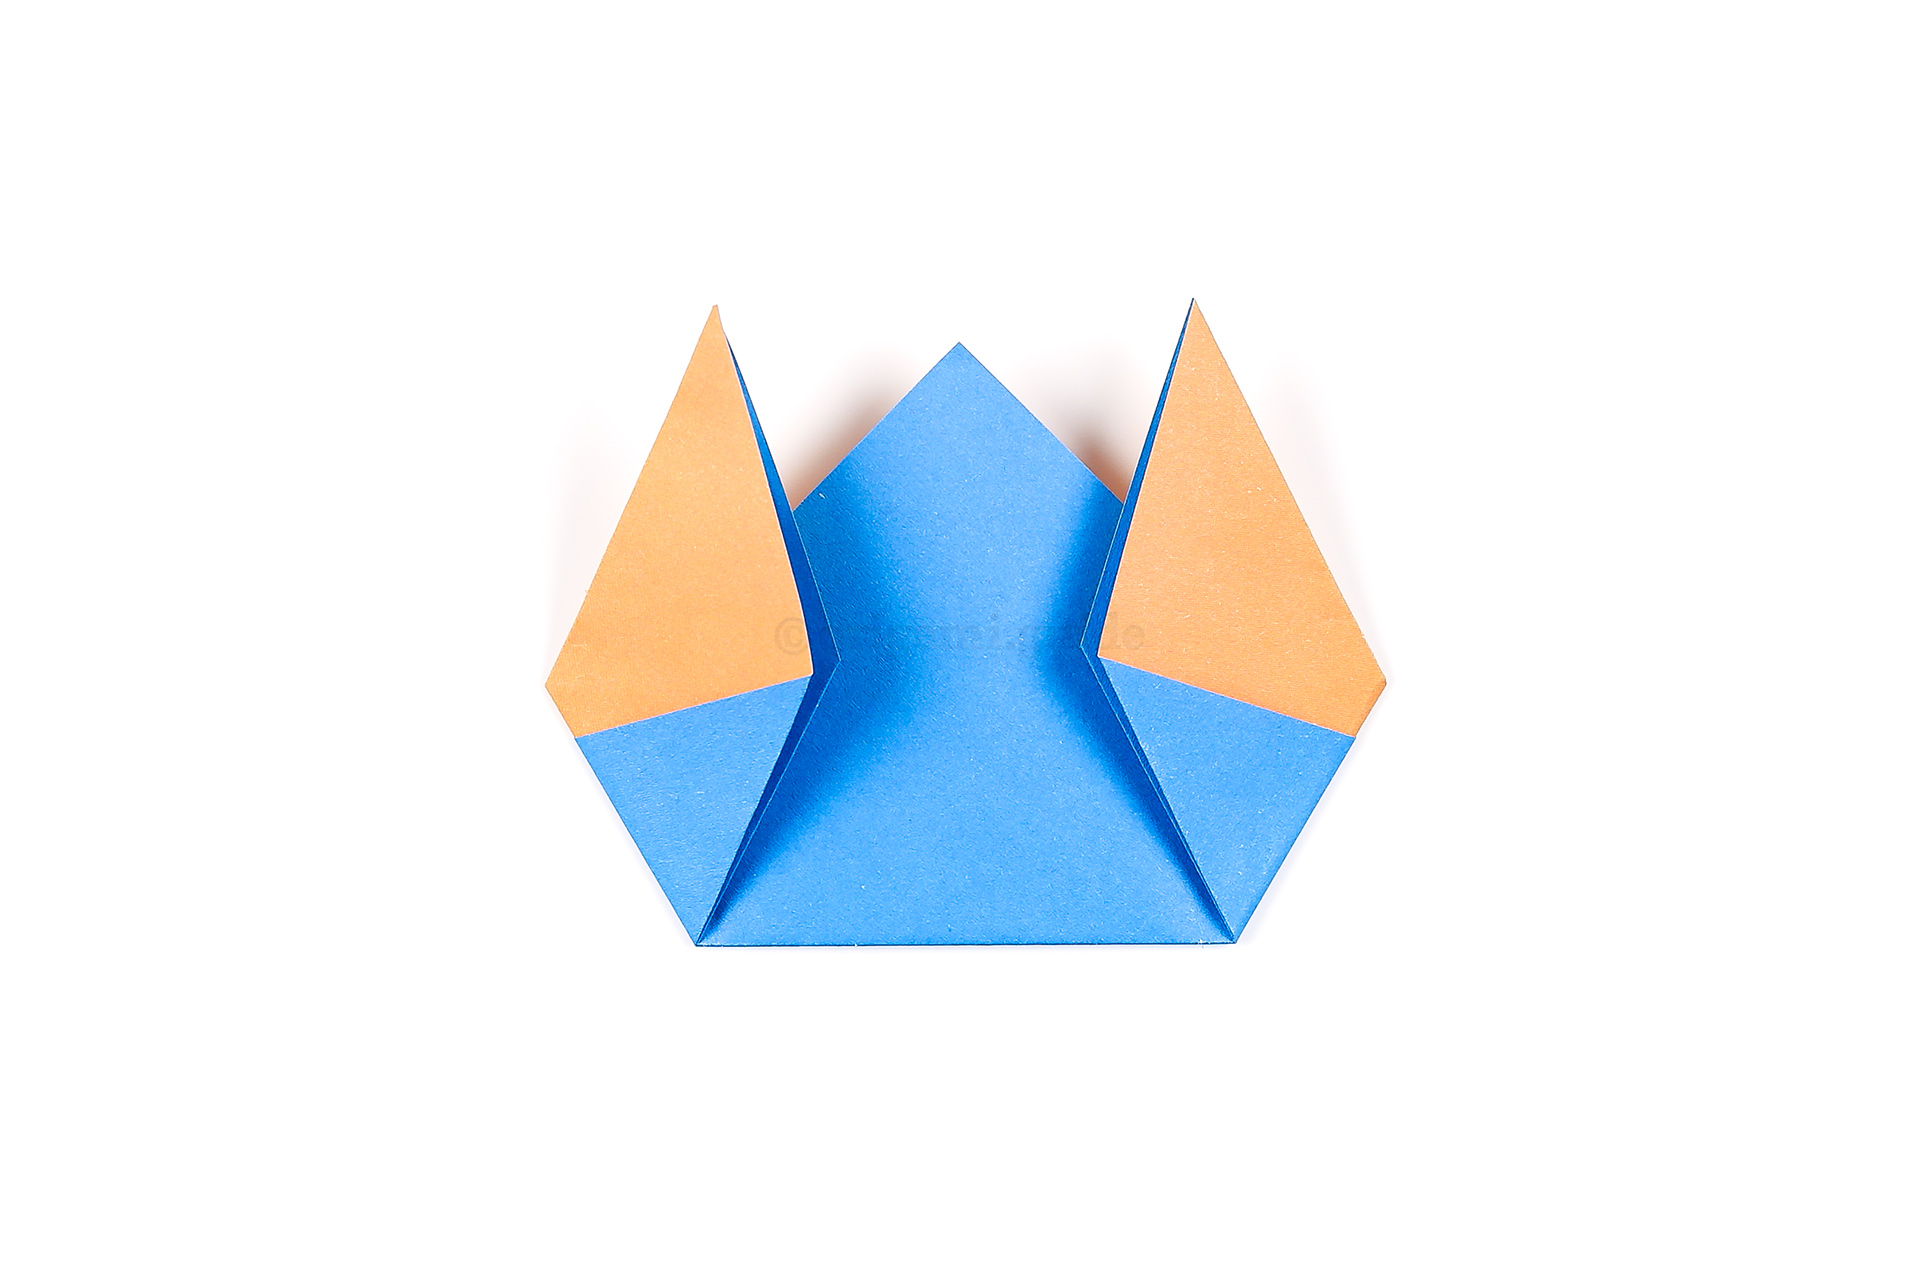 Fold both the left and right points diagonally up at an angle to resemble the shape of your broken egg.